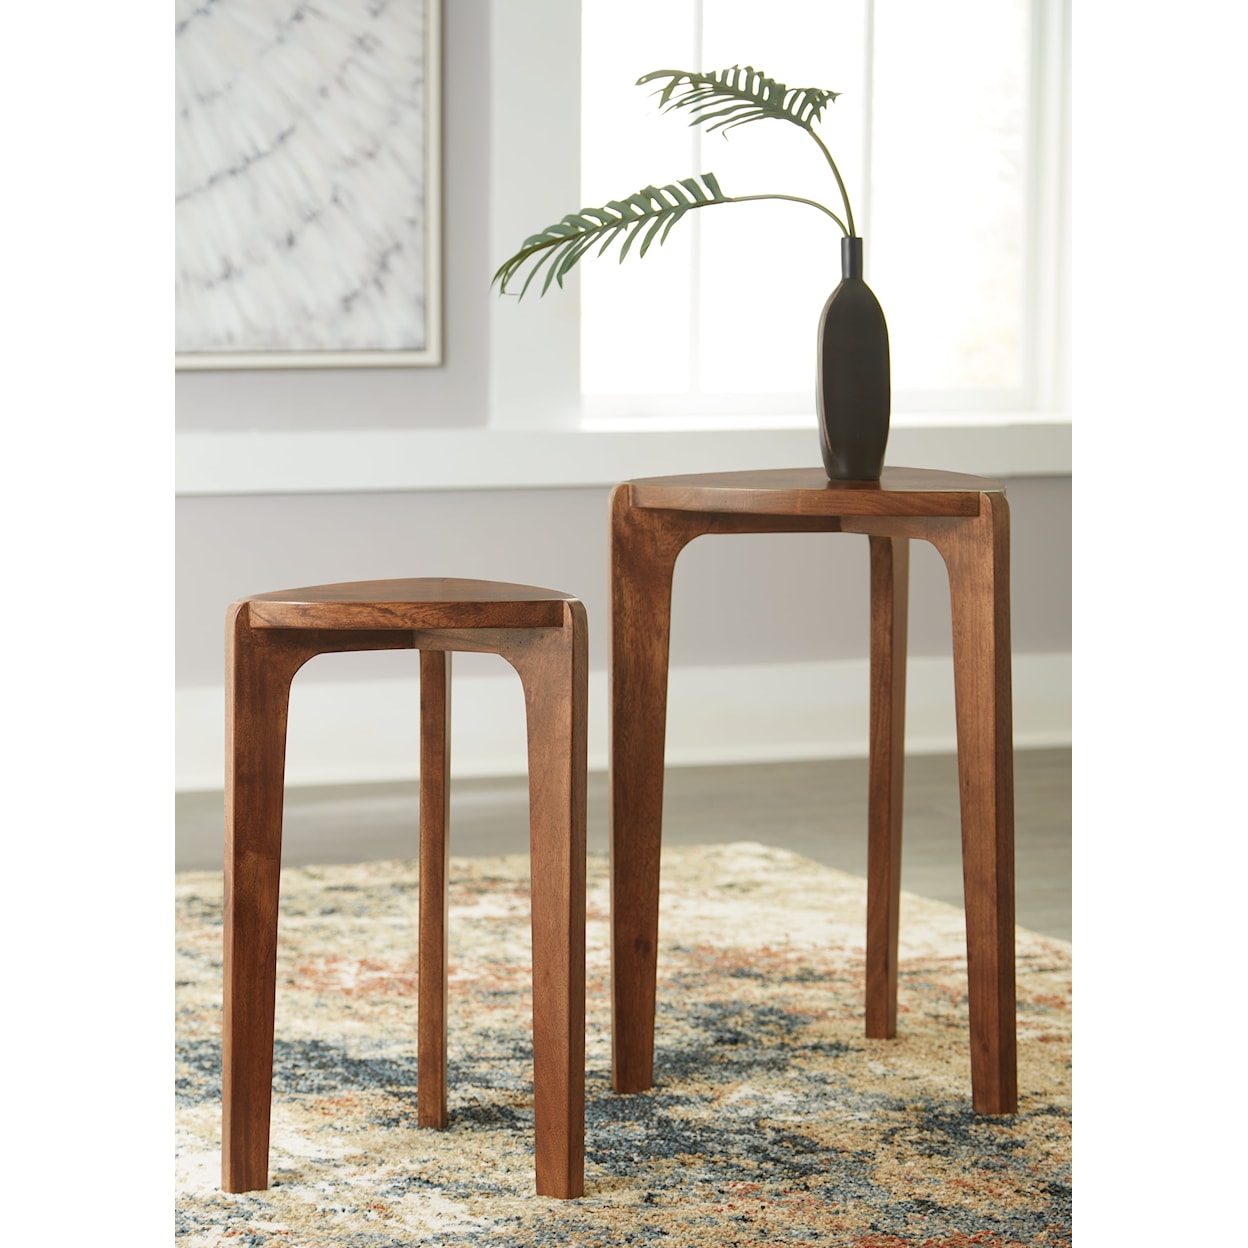 Benchcraft Brynnleigh Accent Table (Set Of 2)